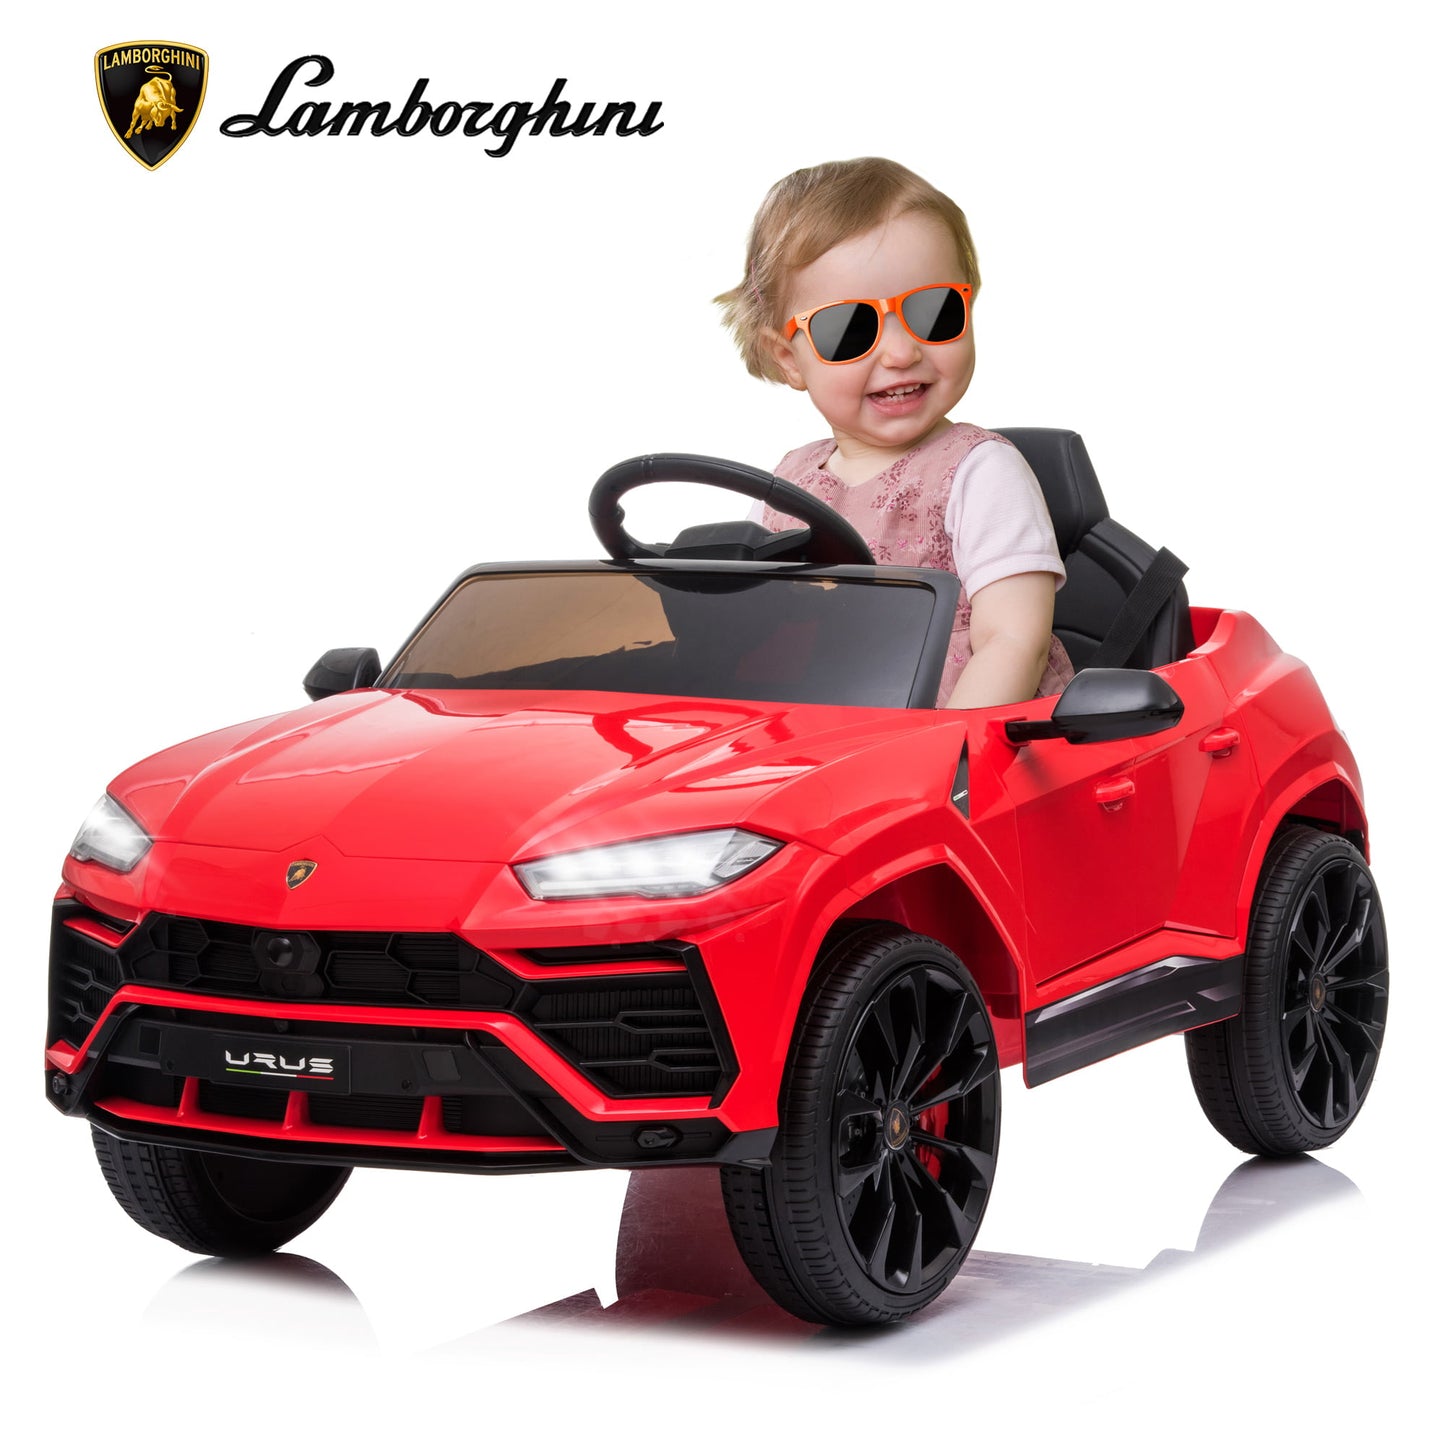 SYNGAR Licensed Lamborghini 12 V Powered Ride on Cars with Remote Control, 3 Speeds, LED Lights, MP3 Player, Horn, Kids Electric Vehicles Ride on Toy for Boys Girls, Red